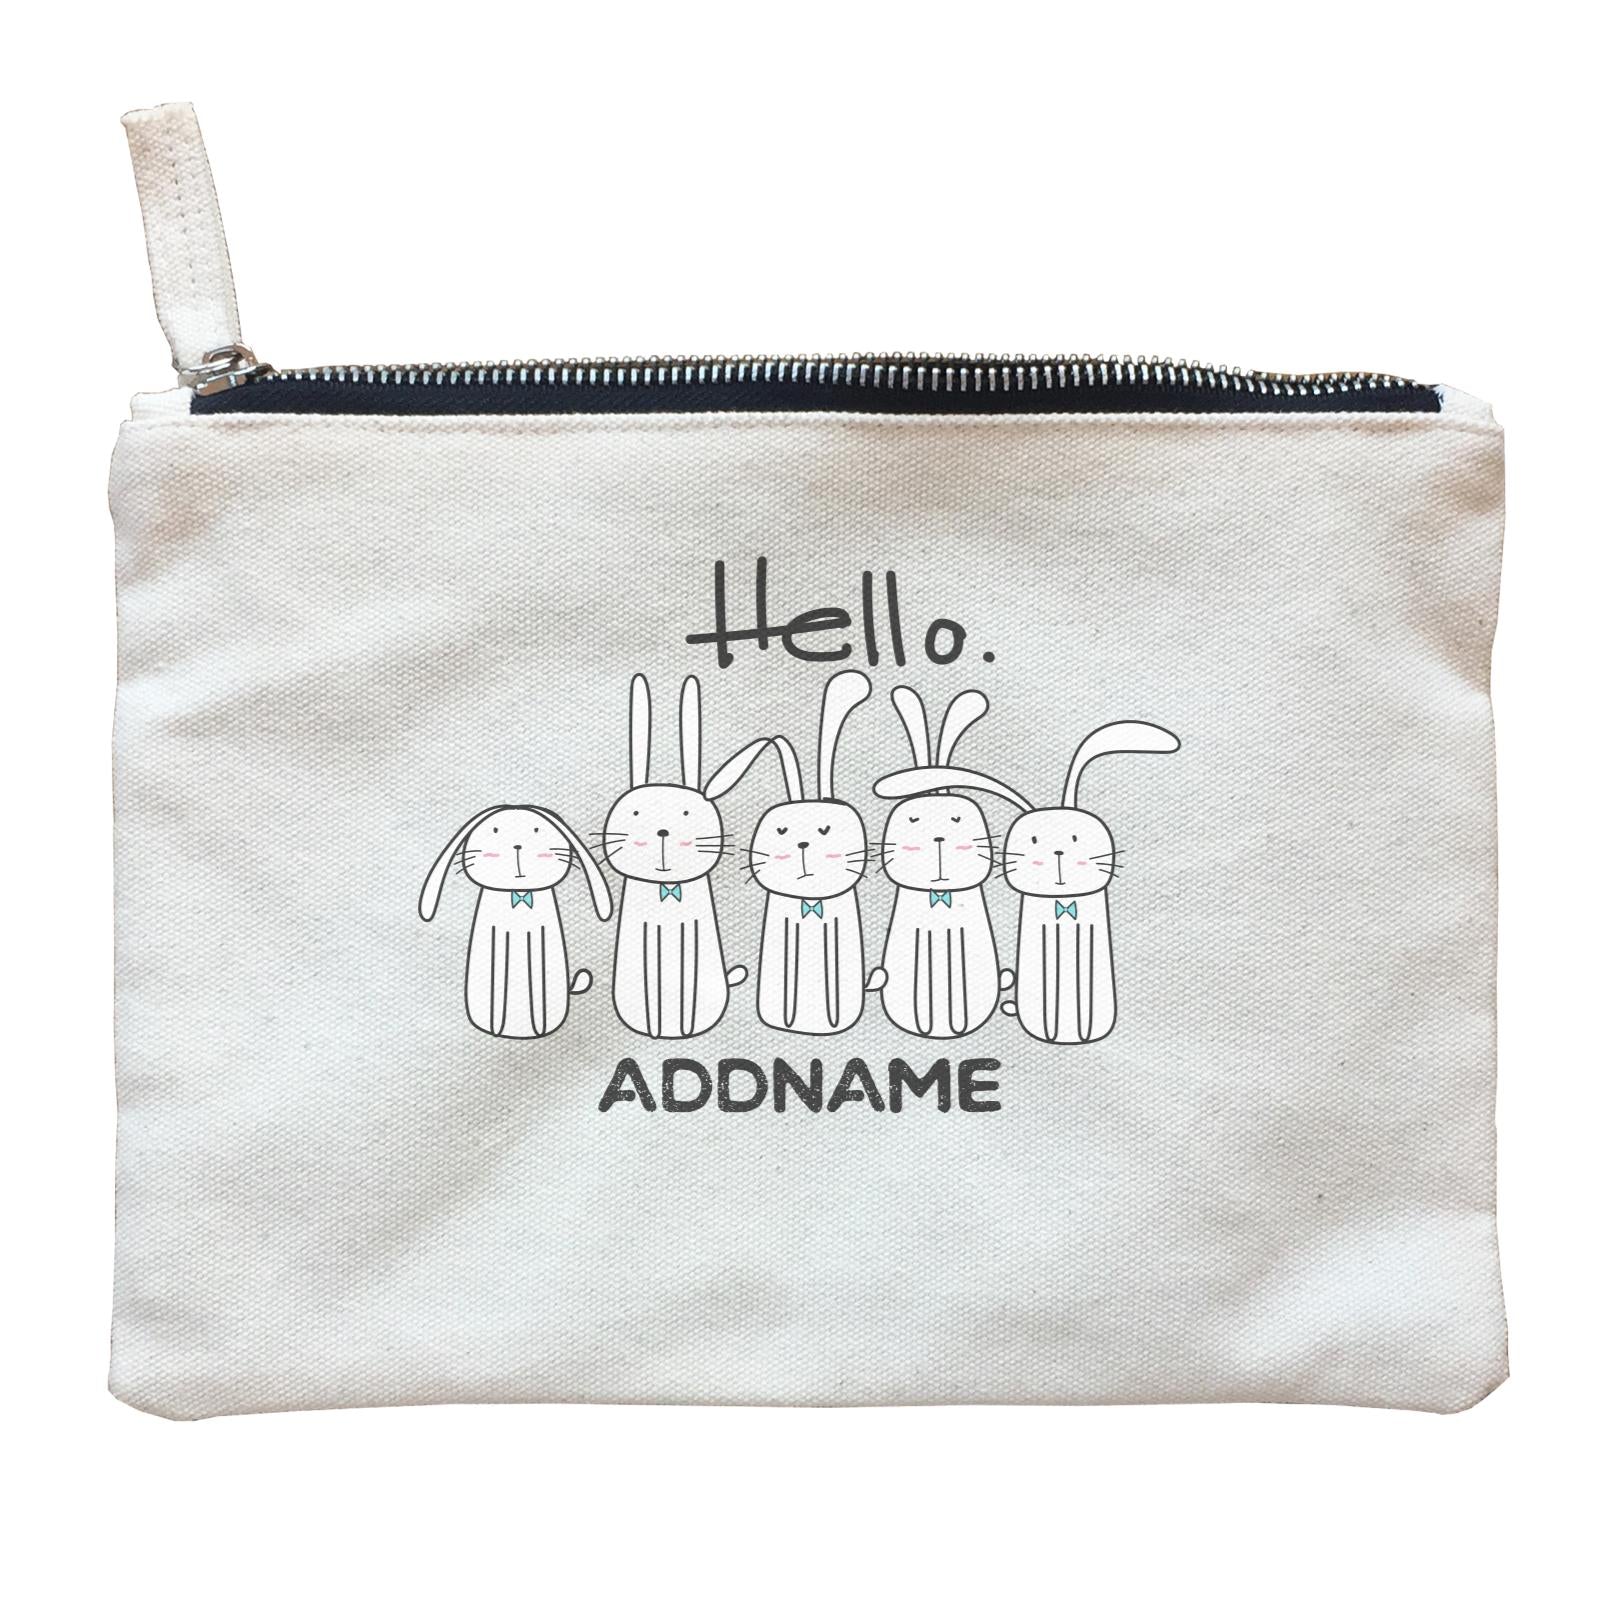 Cute Animals And Friends Series Hello Rabbits Group Addname Zipper Pouch